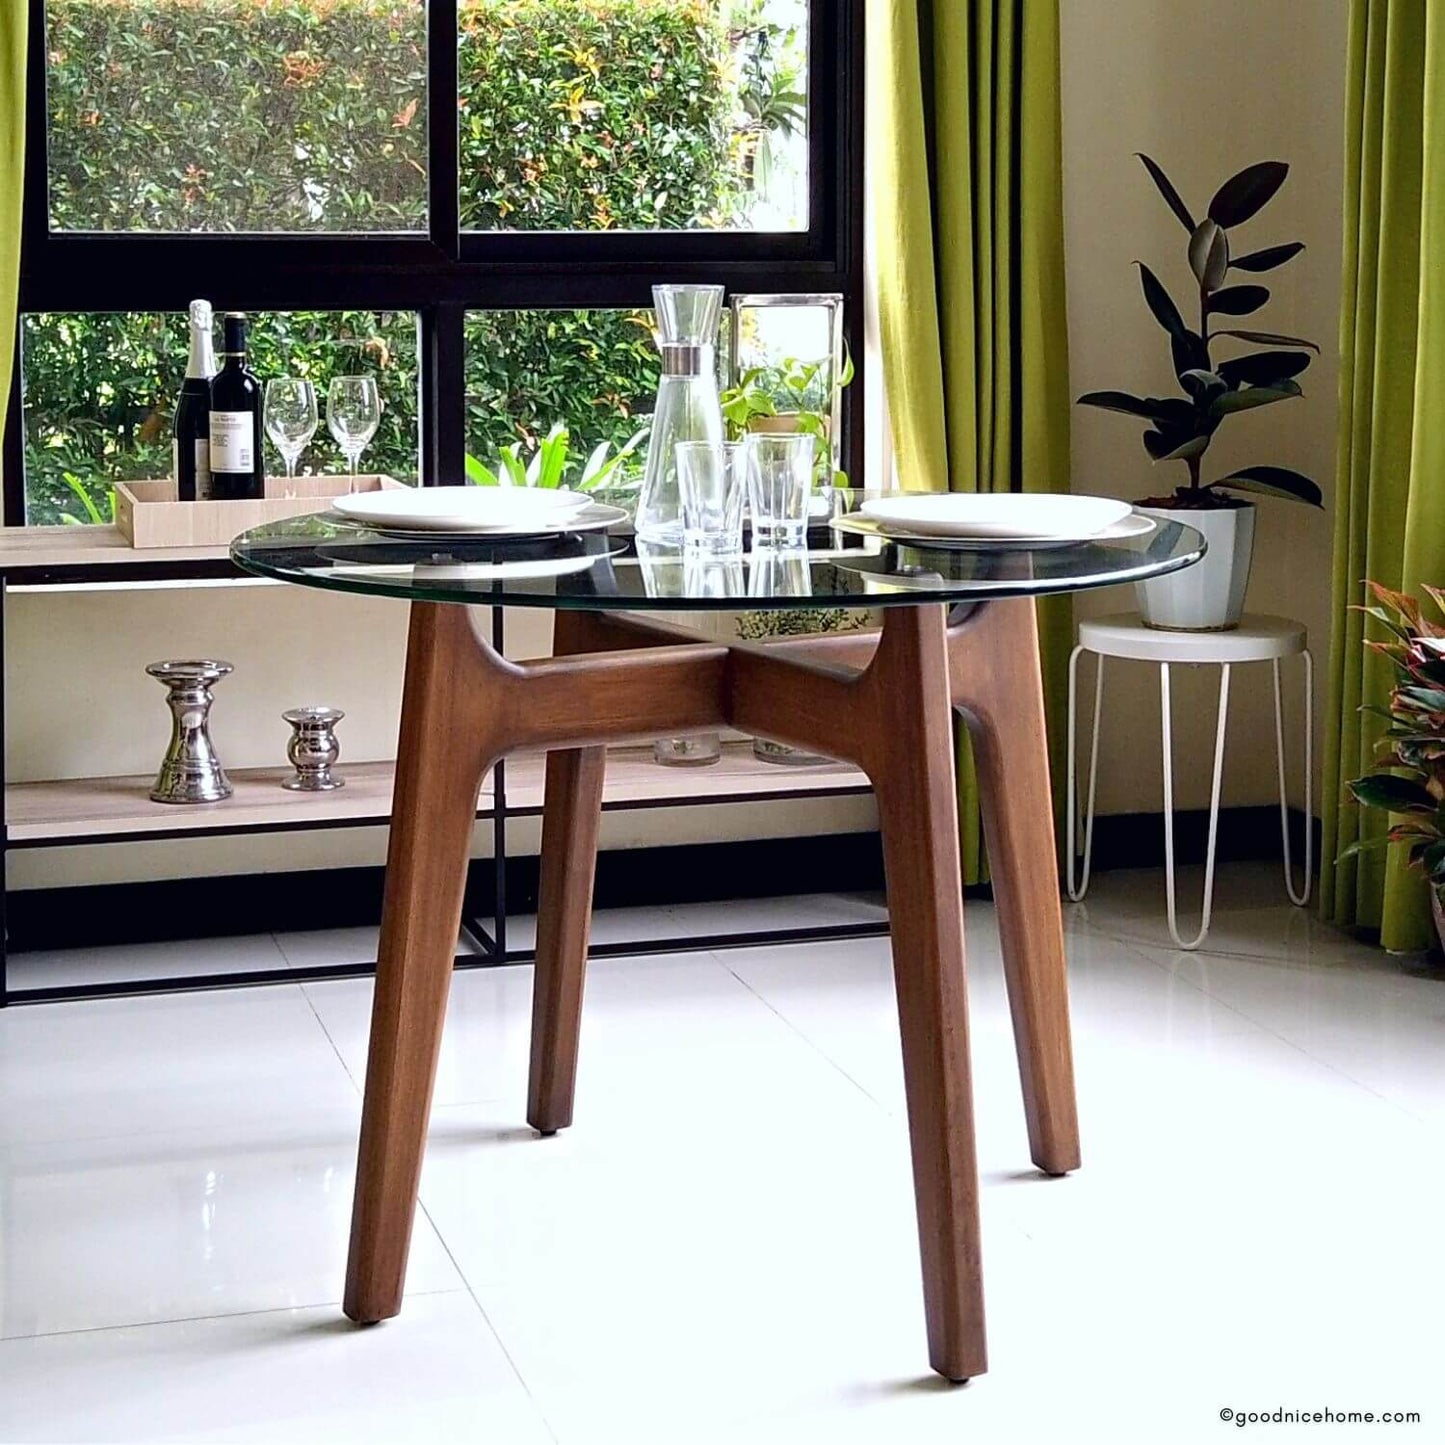 Tricia Glass-Top Dining Table